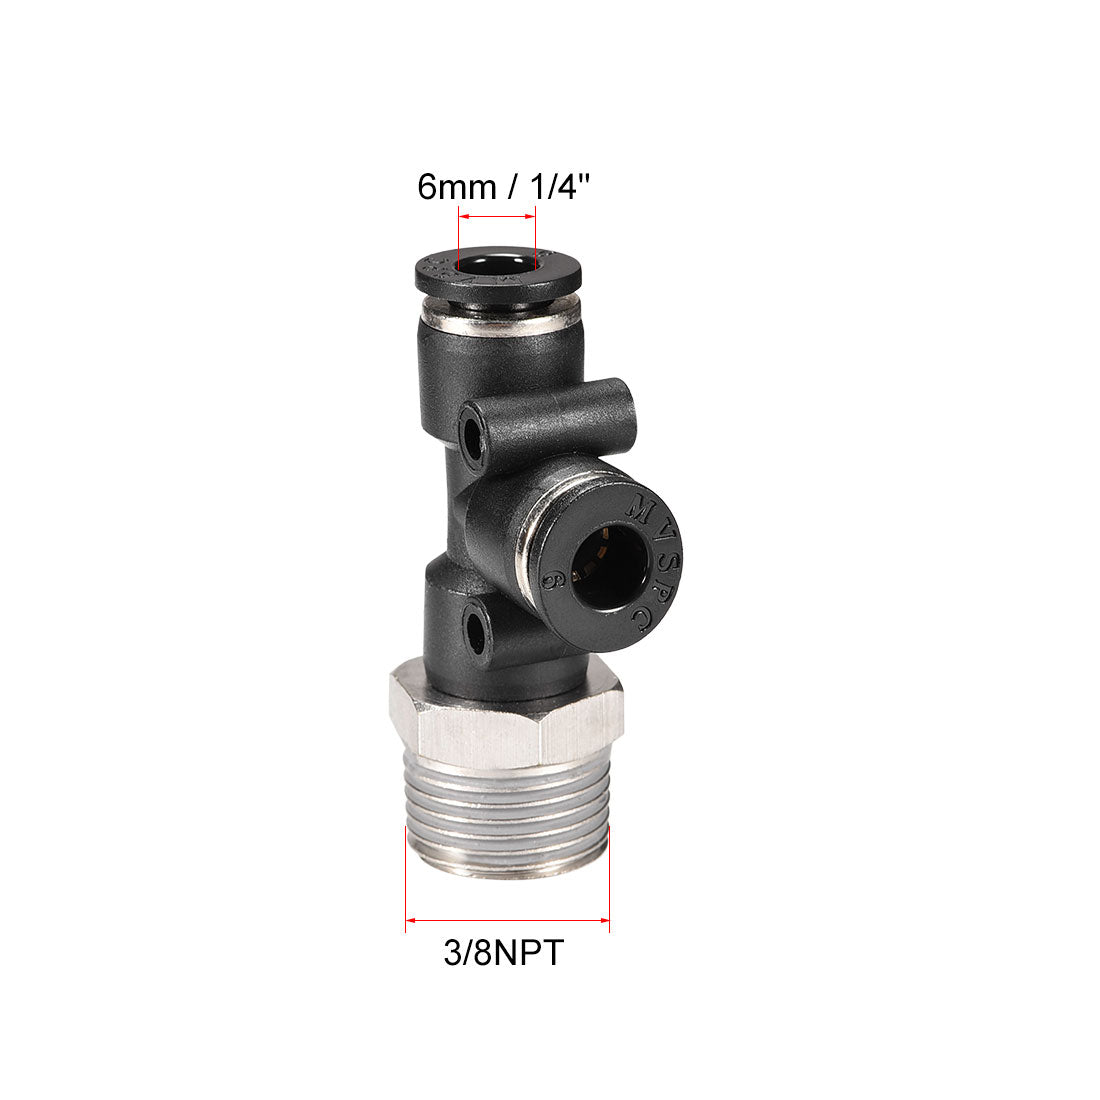 Uxcell Uxcell Plastic Tee Push To Connect Tube Fittings 10mmx3/8NPT Male Thread Push Lock 2pcs